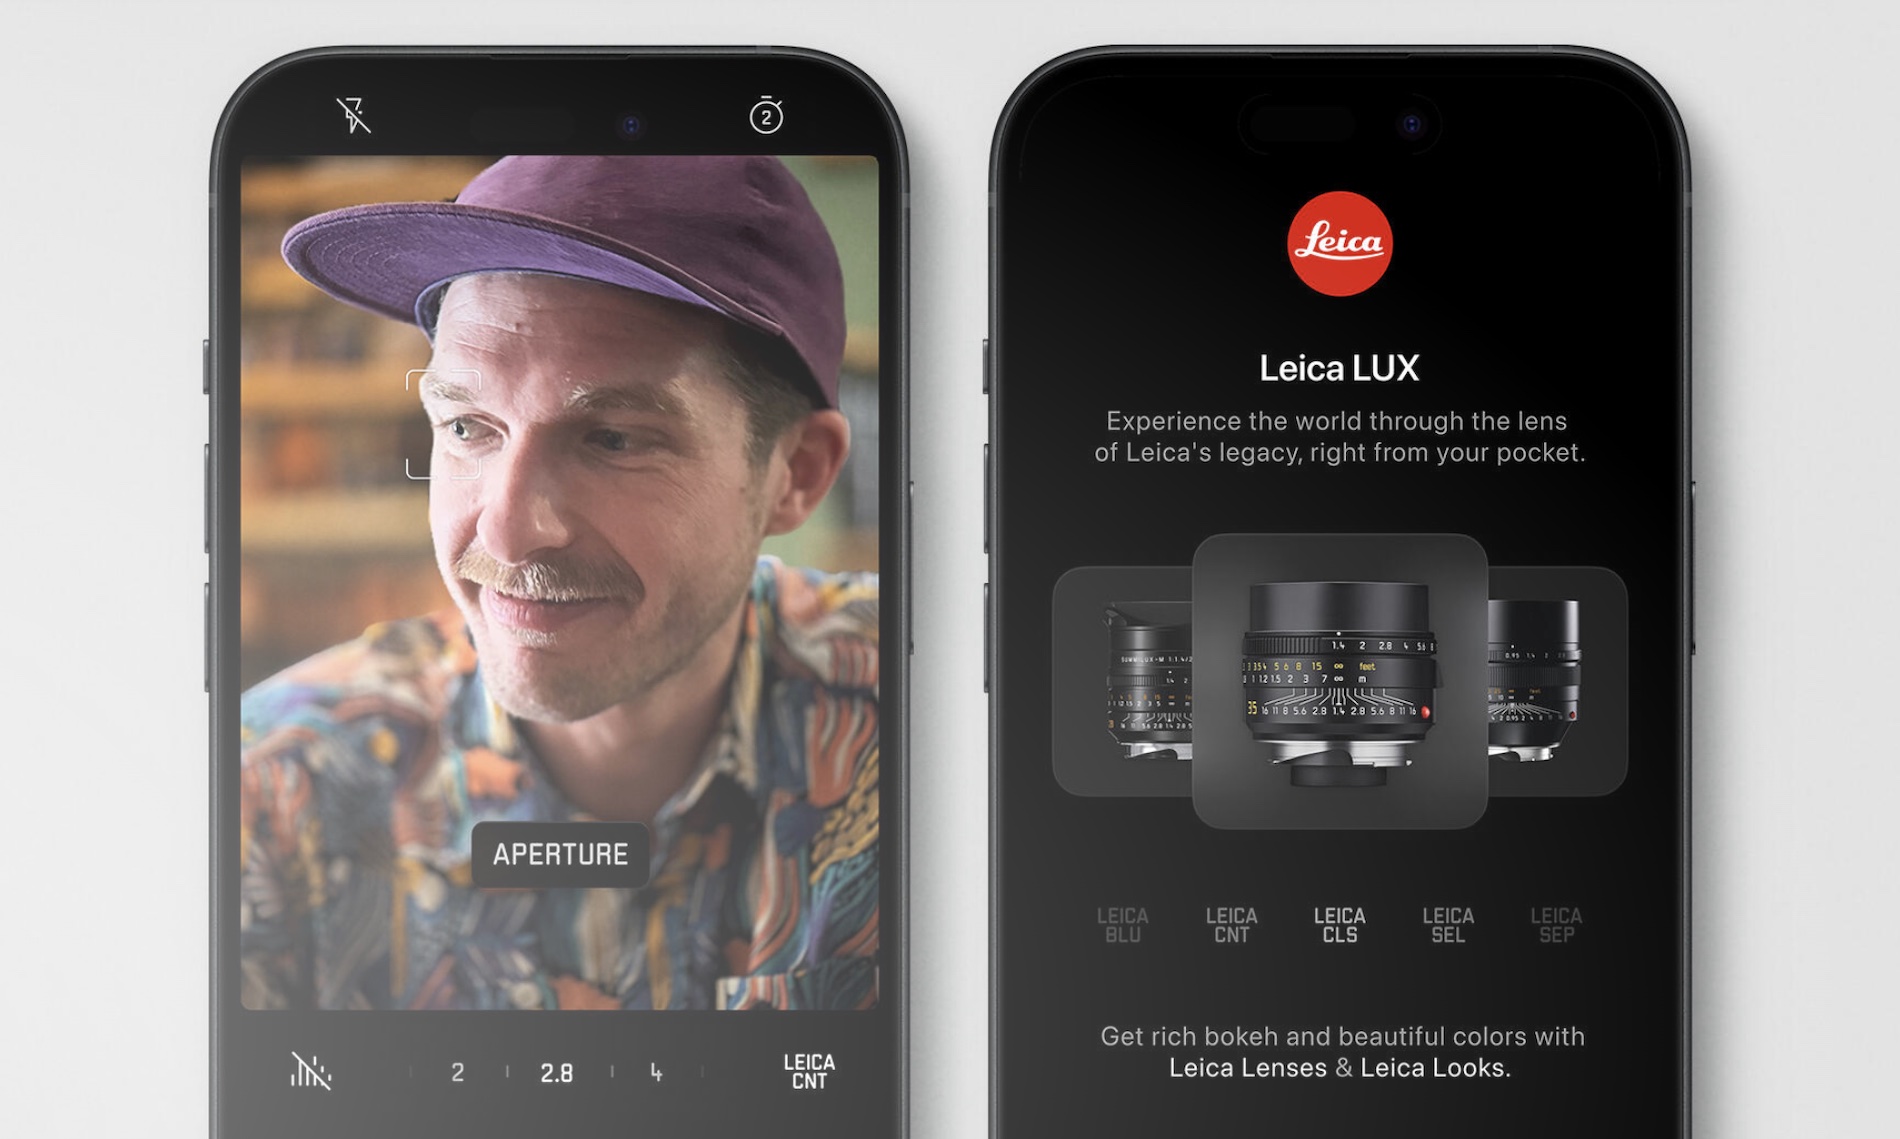 The Leica LUX app for the iPhone.